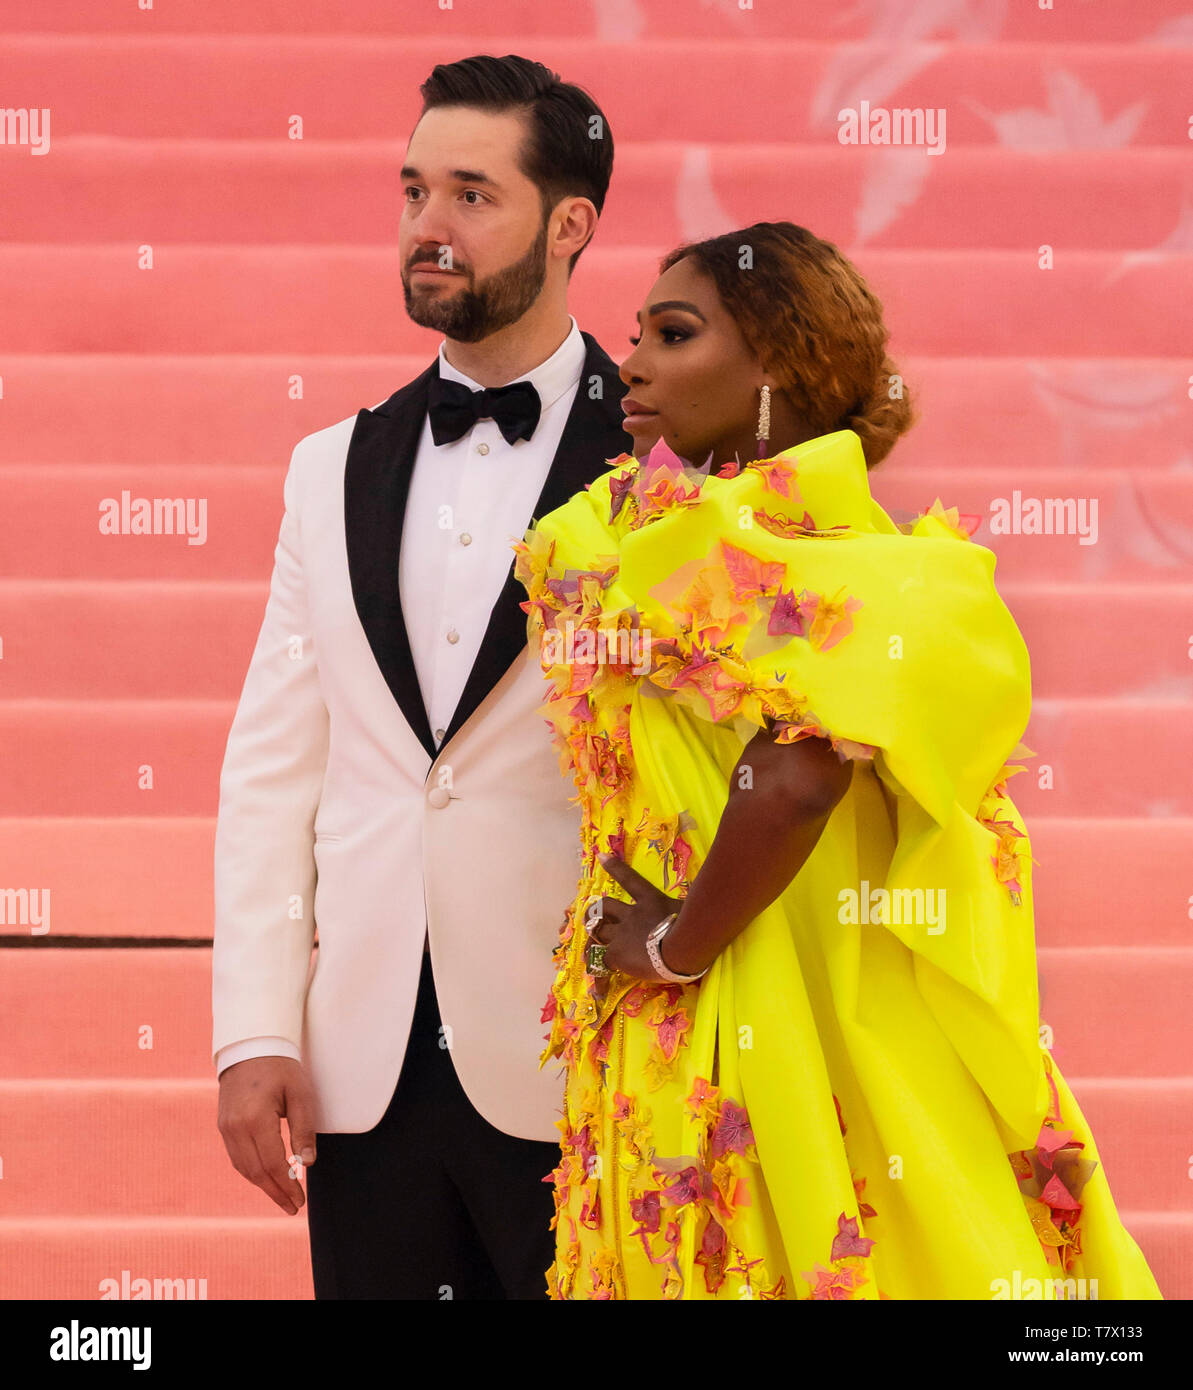 New York, NY - May 06, 2019: Alexis Ohanian and Serena Williams arrive for the 2019 Met Gala celebrating Camp: Notes on Fashion at The Metropolitan Mu Stock Photo